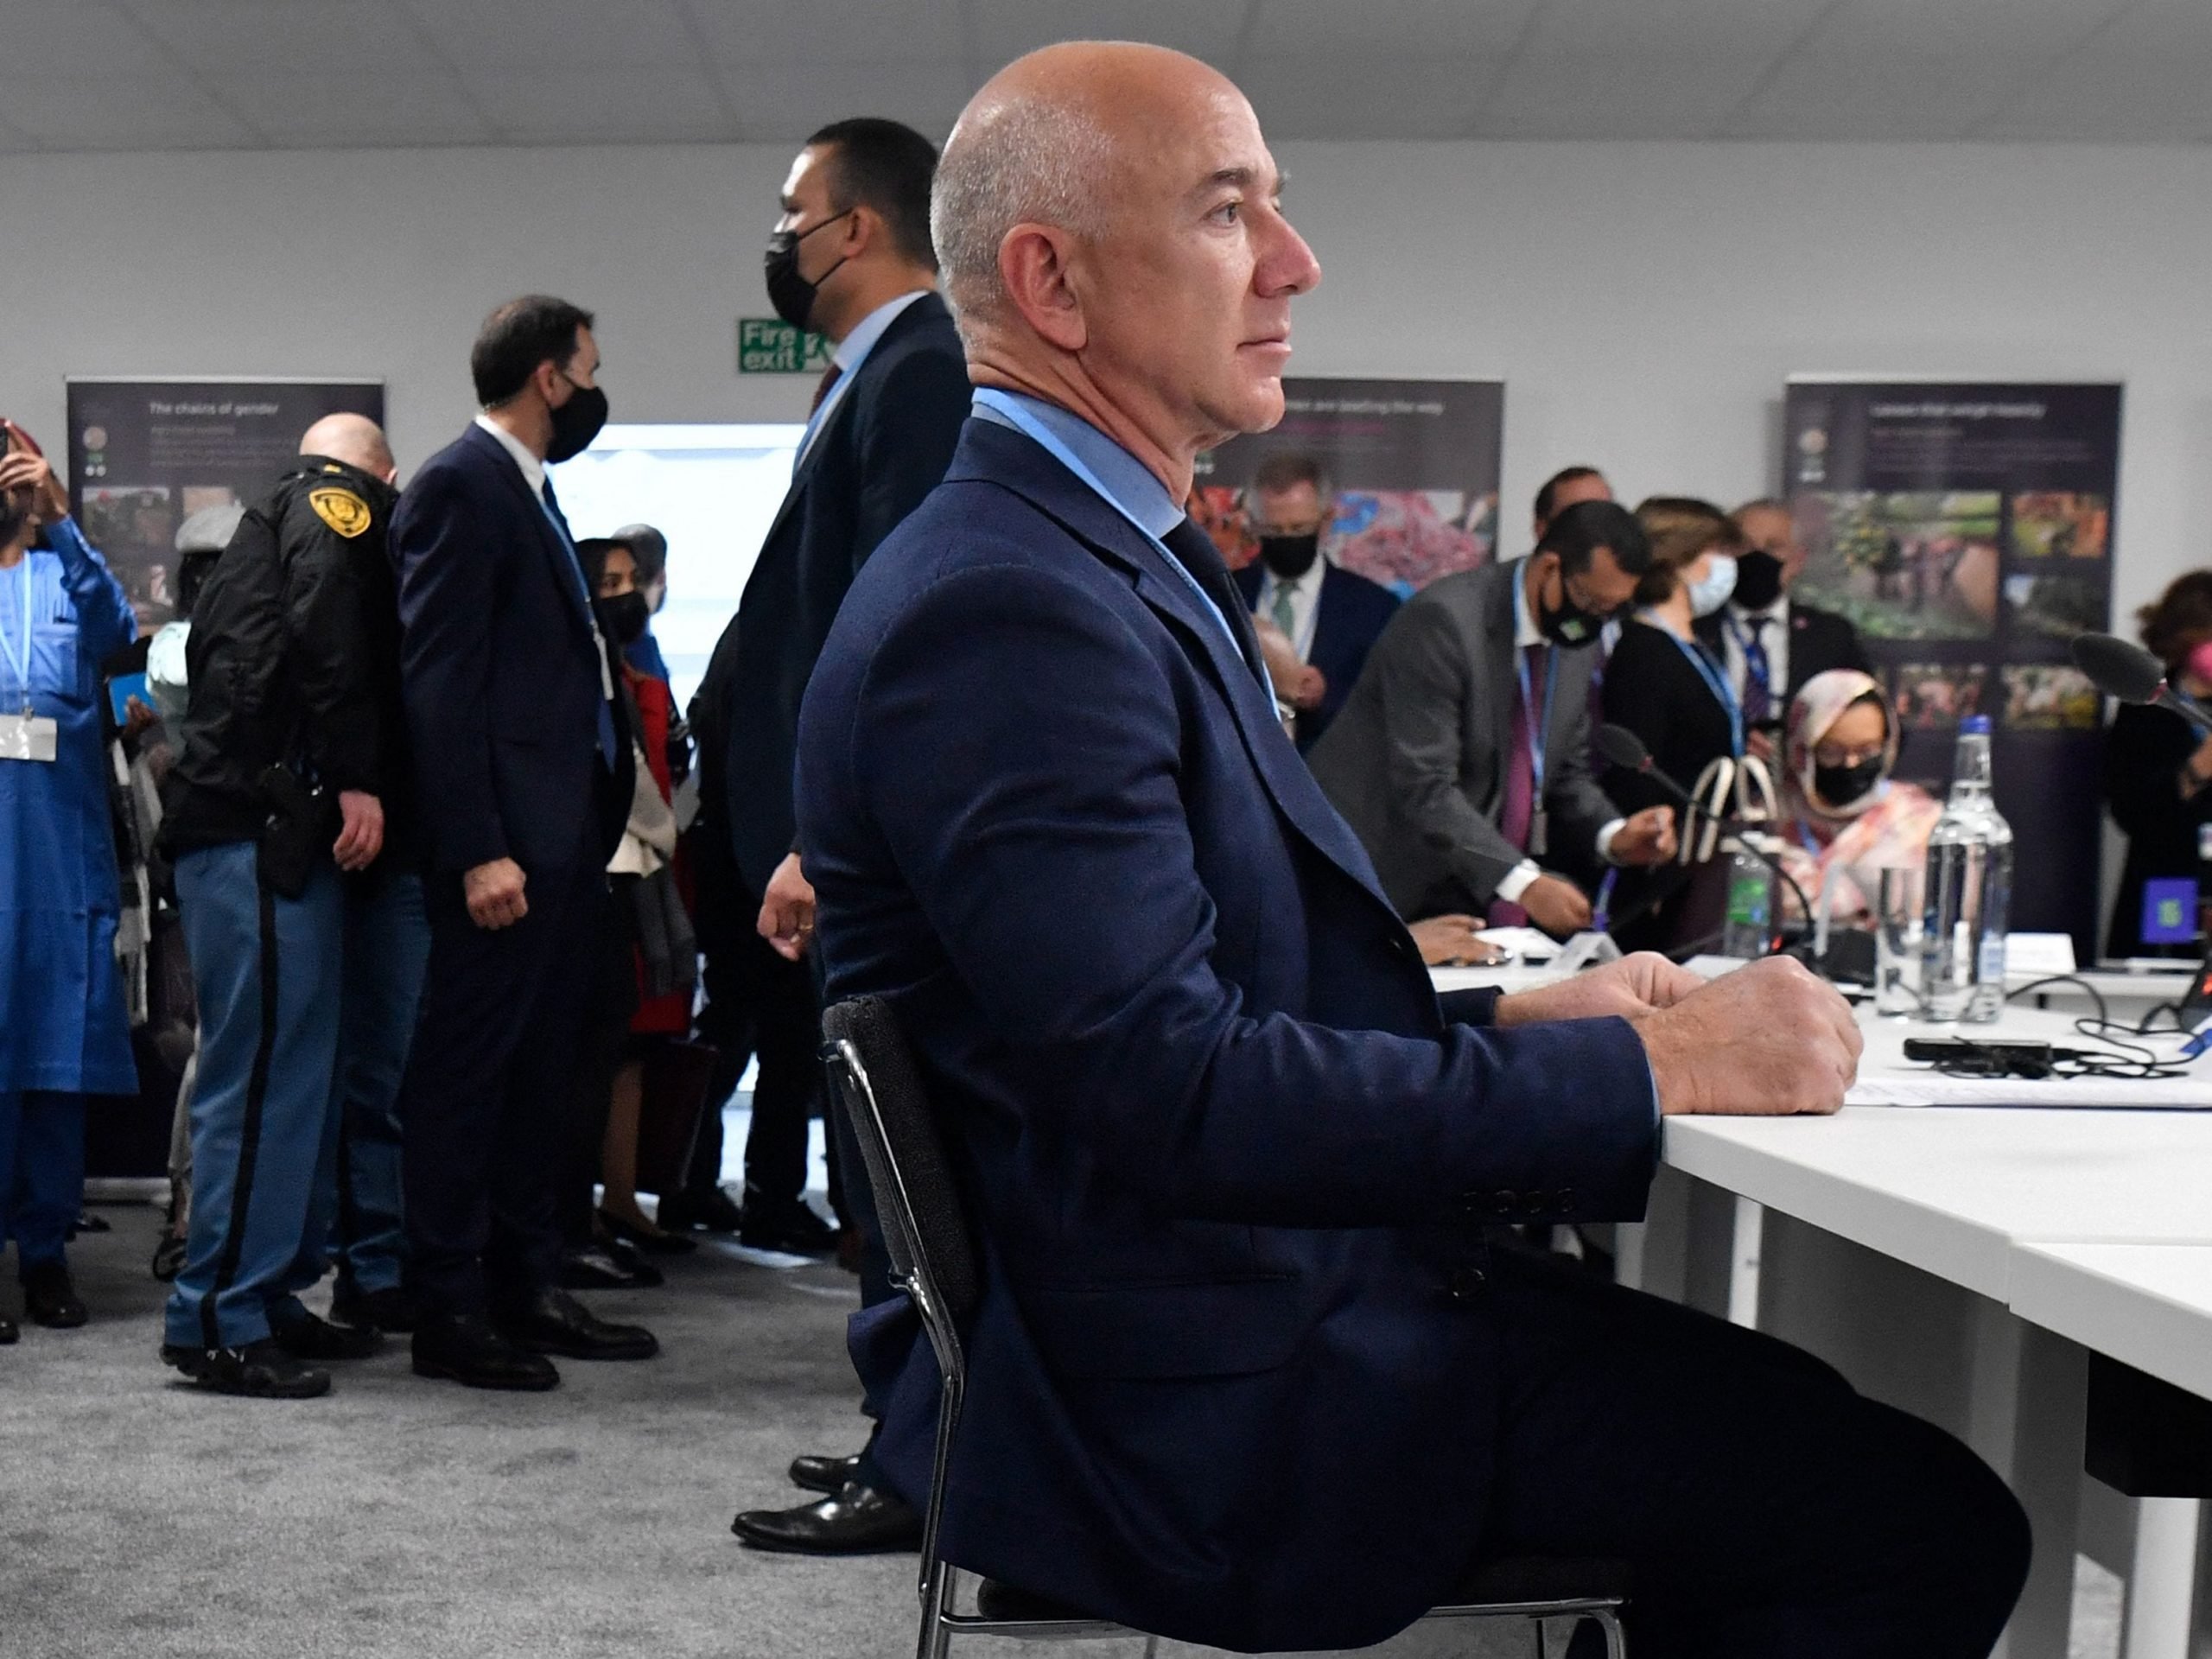 Amazon founder Jeff Bezos at the COP26 UN Climate Change Conference in Glasgow, Scotland.